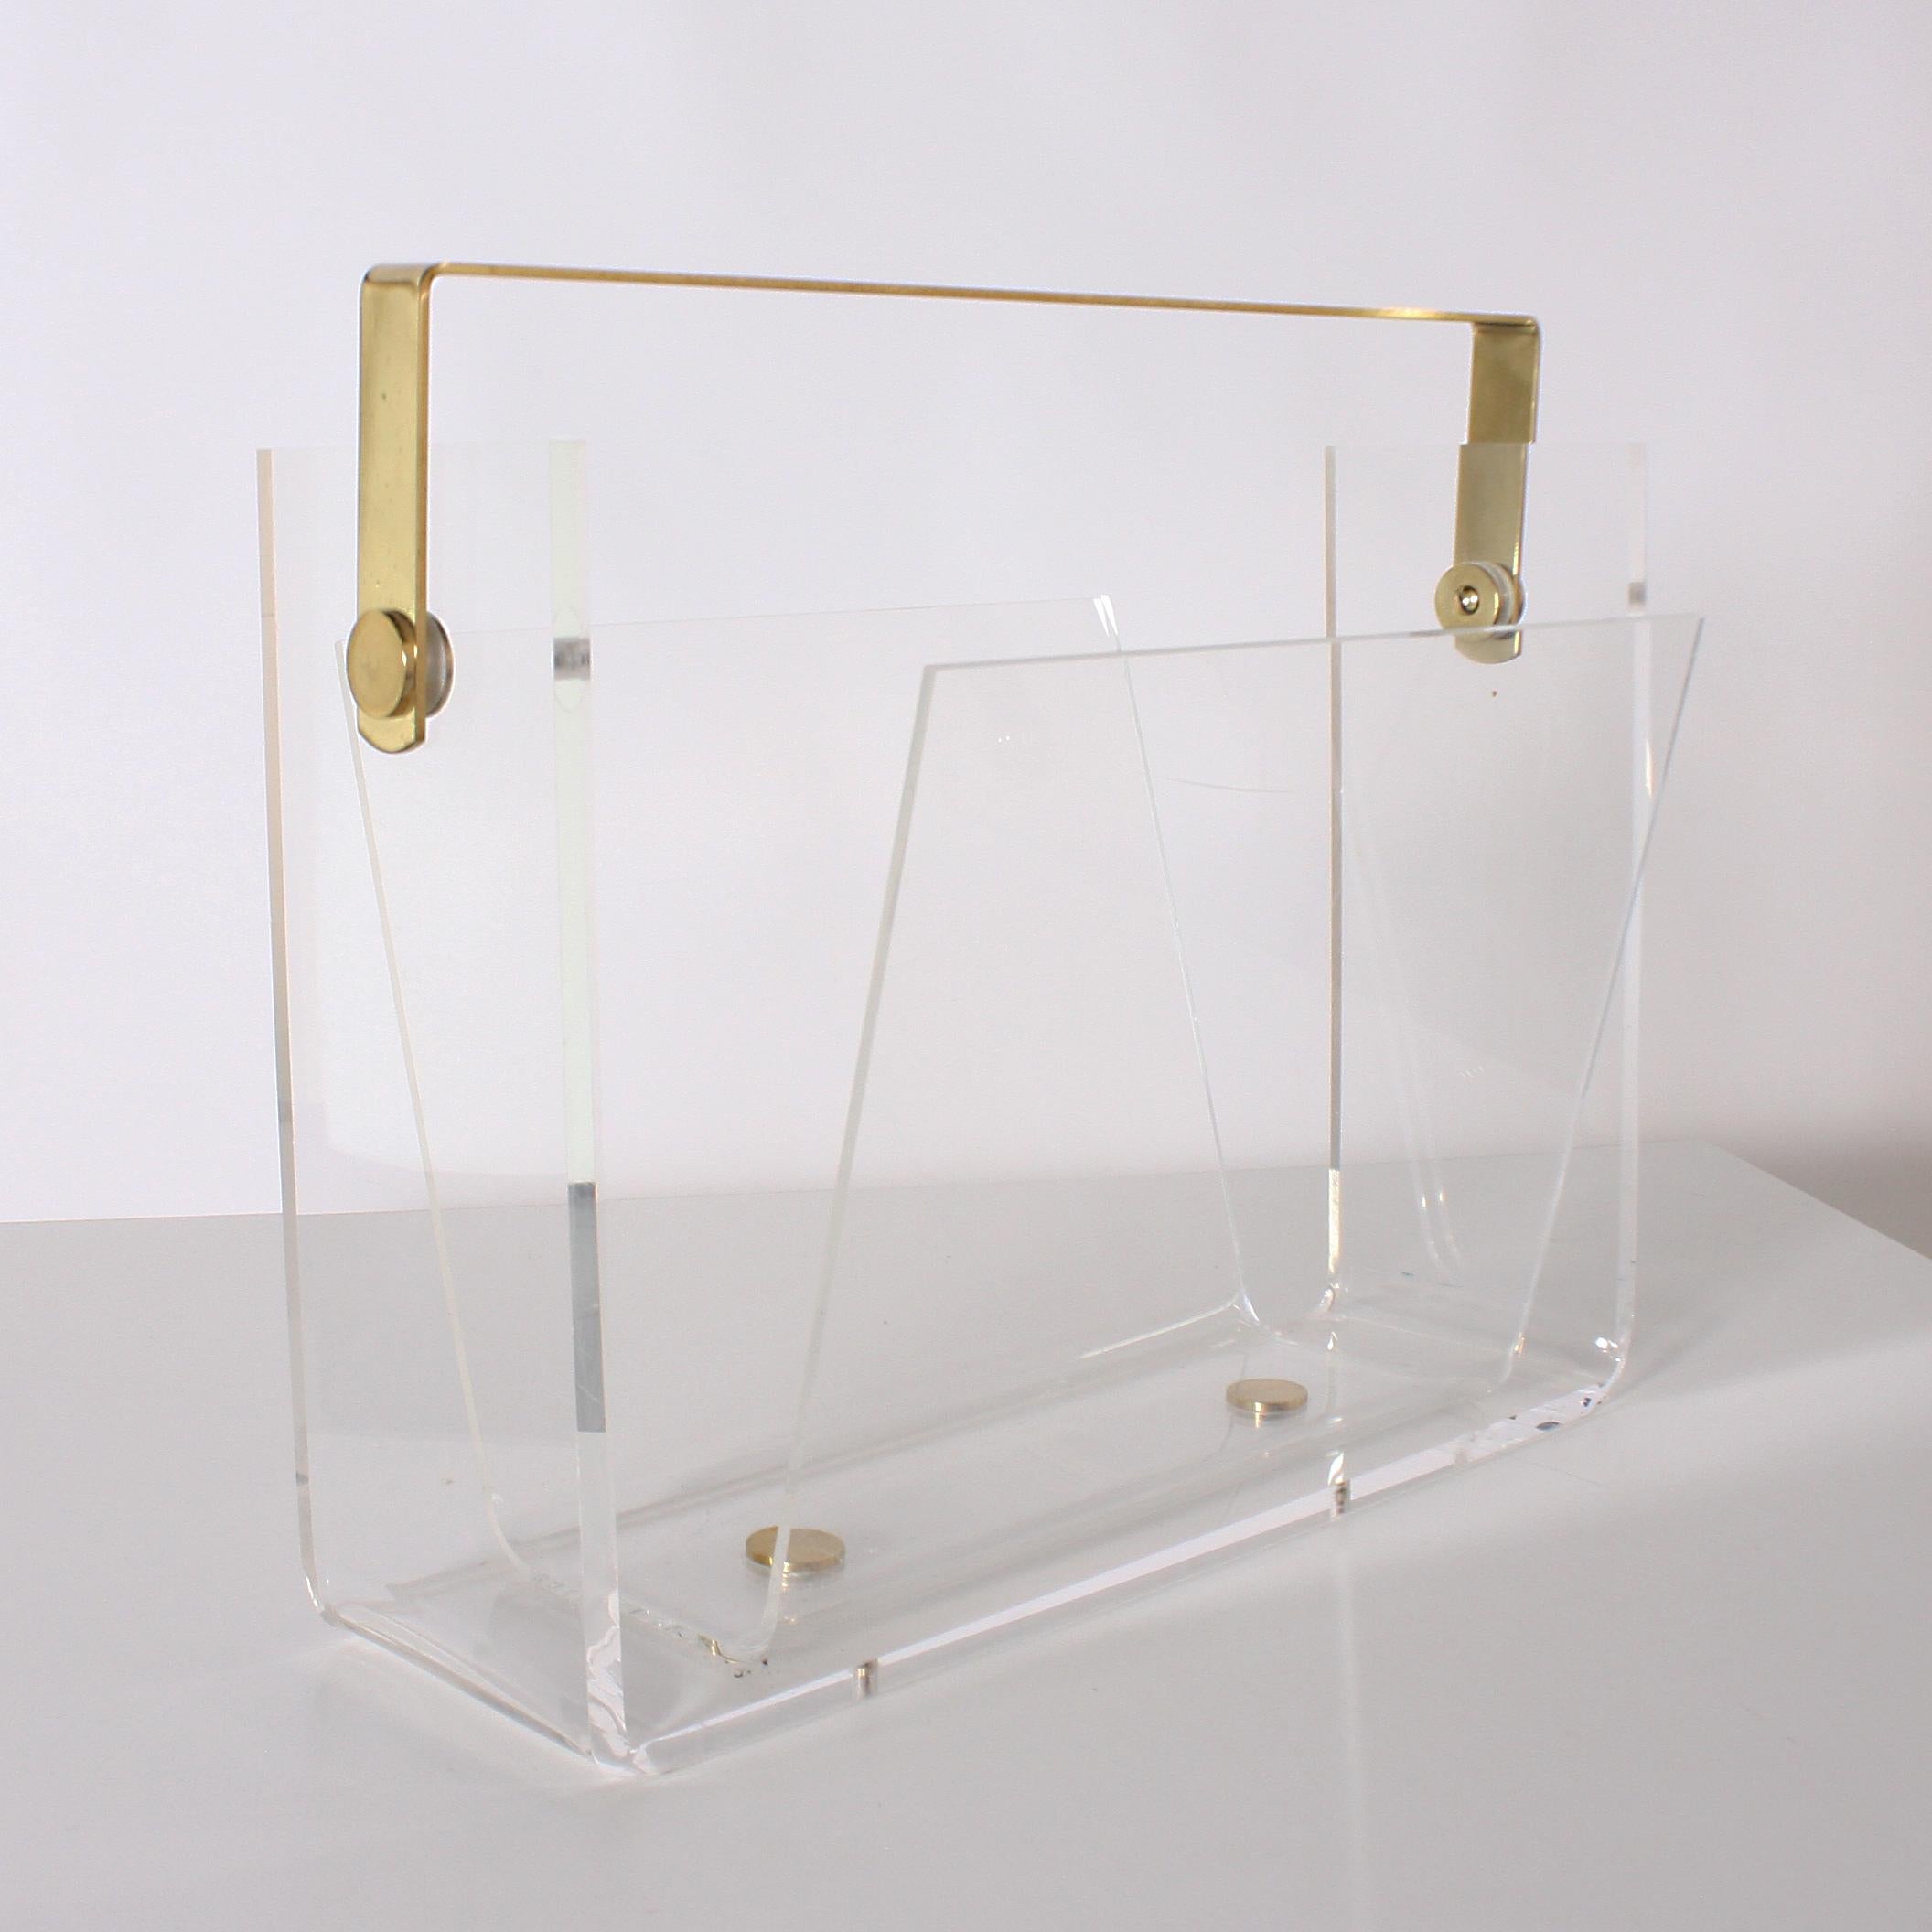 Lucite magazine rack with brass handle and detail, circa 1960.
 